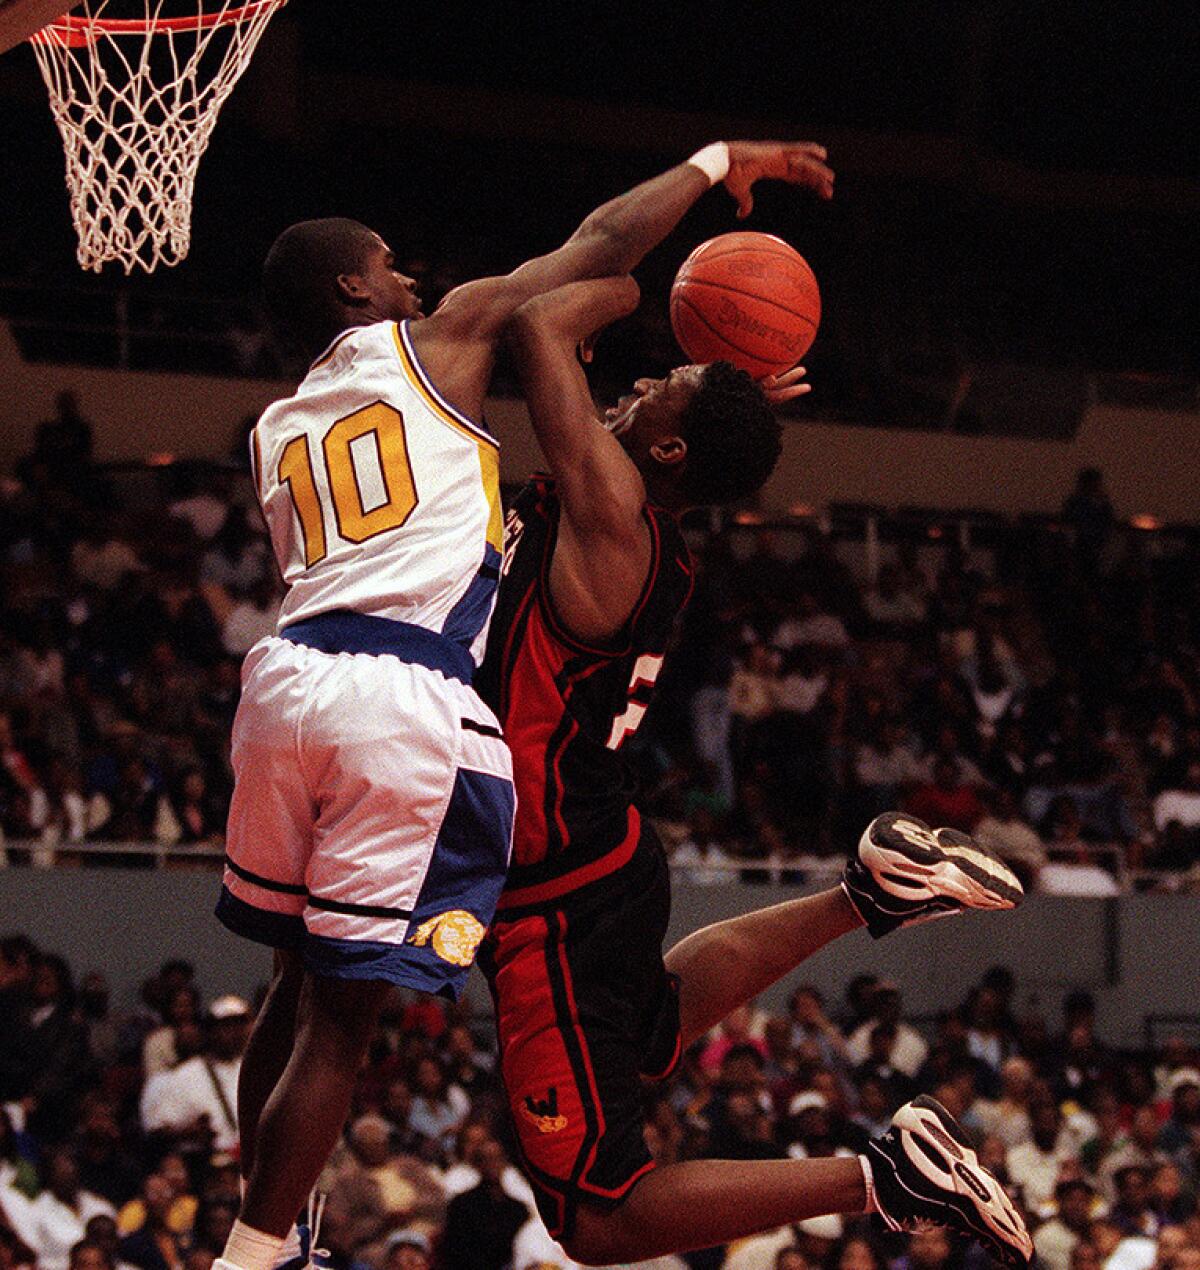 Crenshaw guard Kevin Bradley blocks a shot by Westchester's Albert Miller during the 1997 City Section championship basketball game at the L.A. Sports Arena.